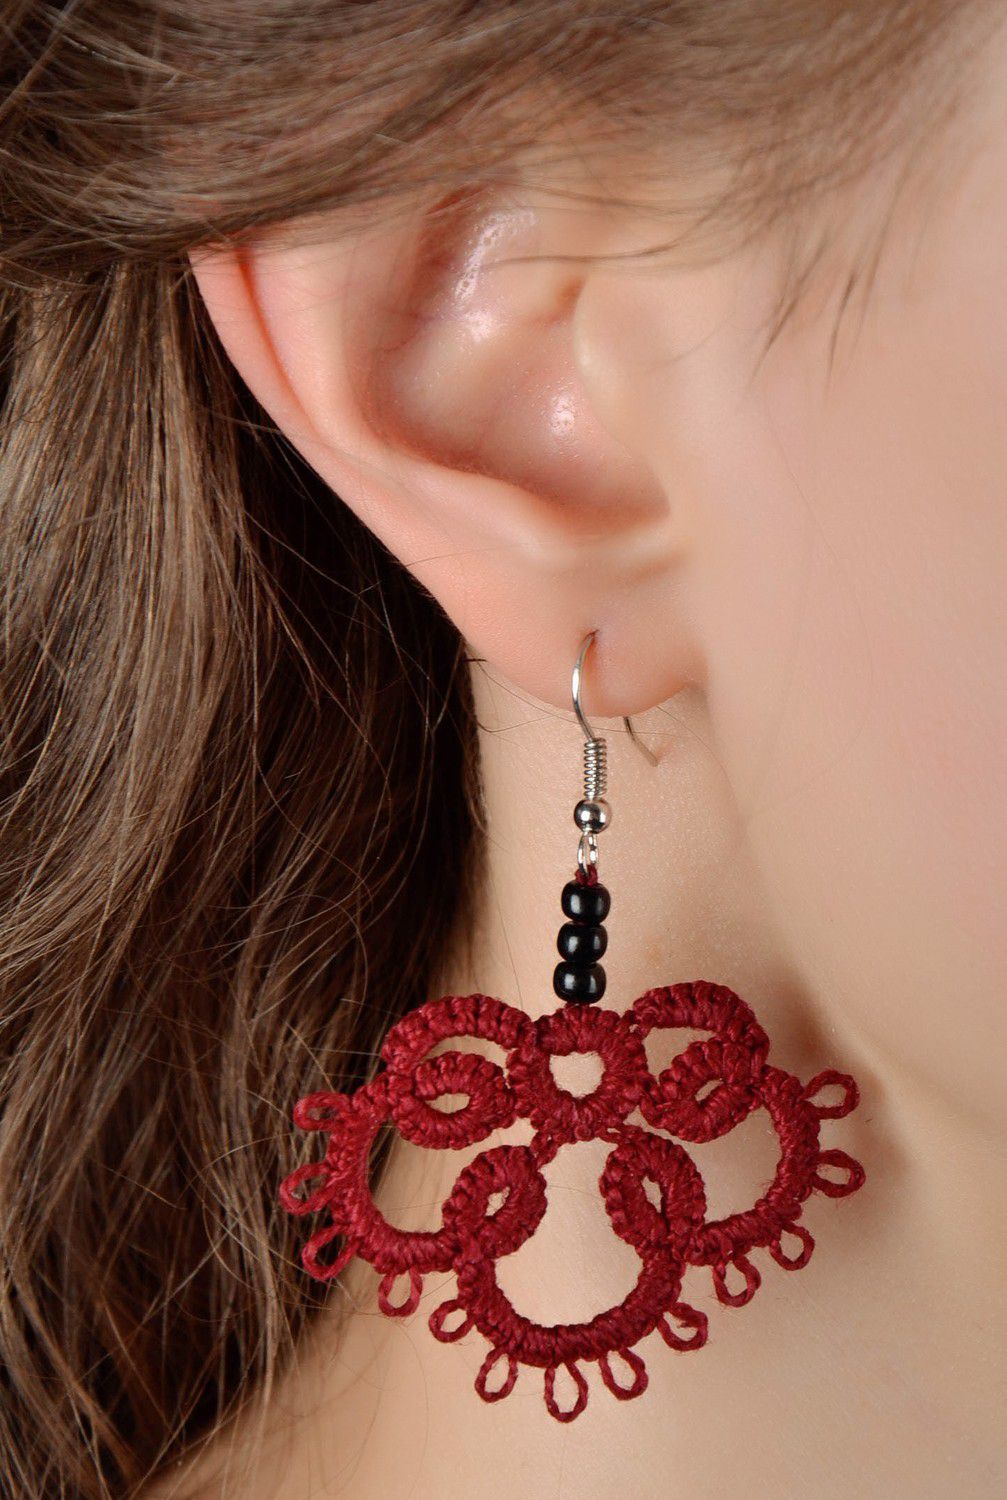 Earrings made from woven lace Claret Clover photo 4